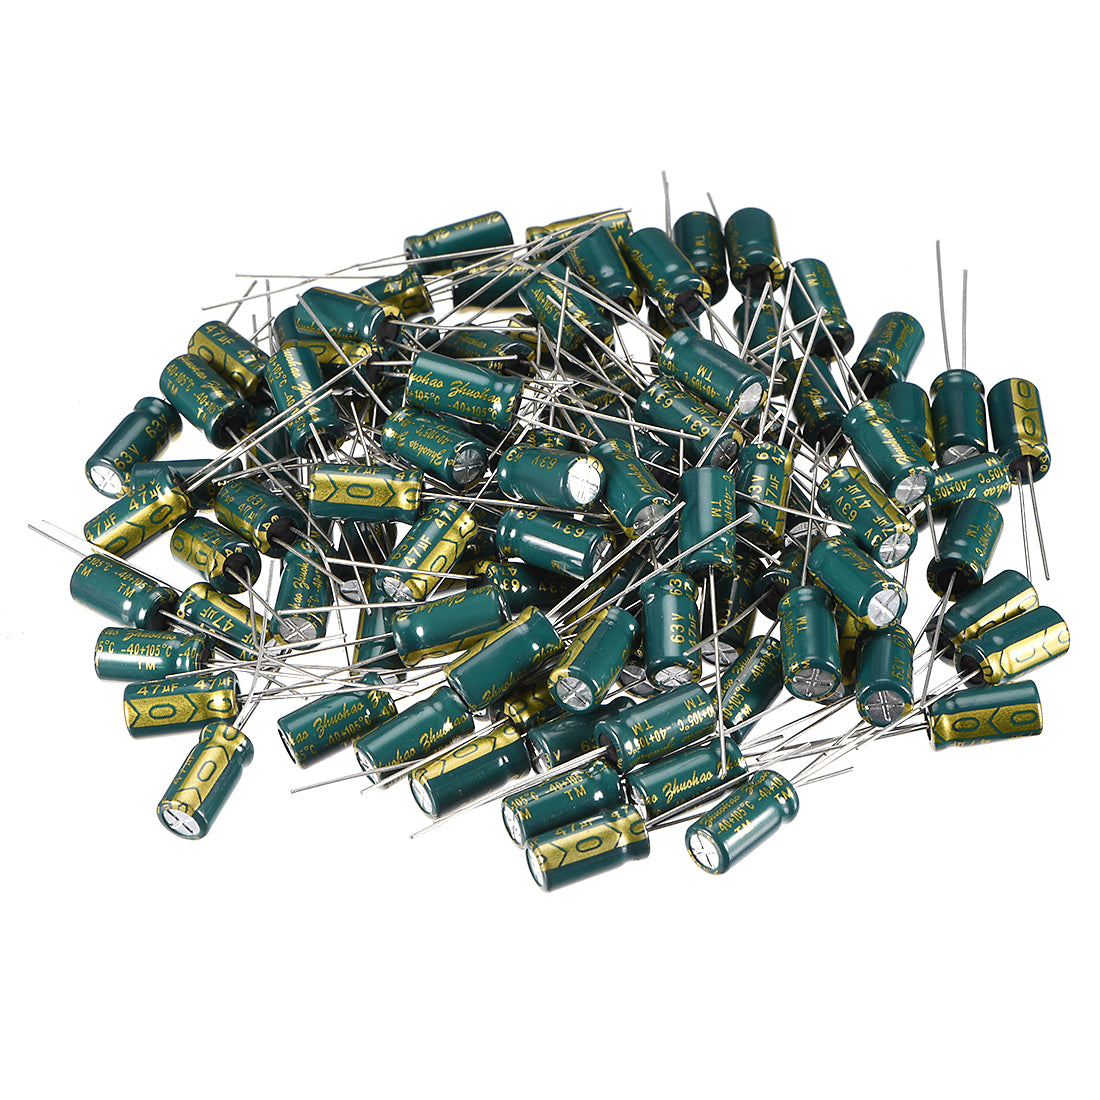 uxcell Uxcell Aluminum Radial Electrolytic Capacitor Low ESR Green with 47uF 63V 105 Celsius Life 3000H 6.3 x 12 mm High Ripple Current,Low Impedance 100pcs